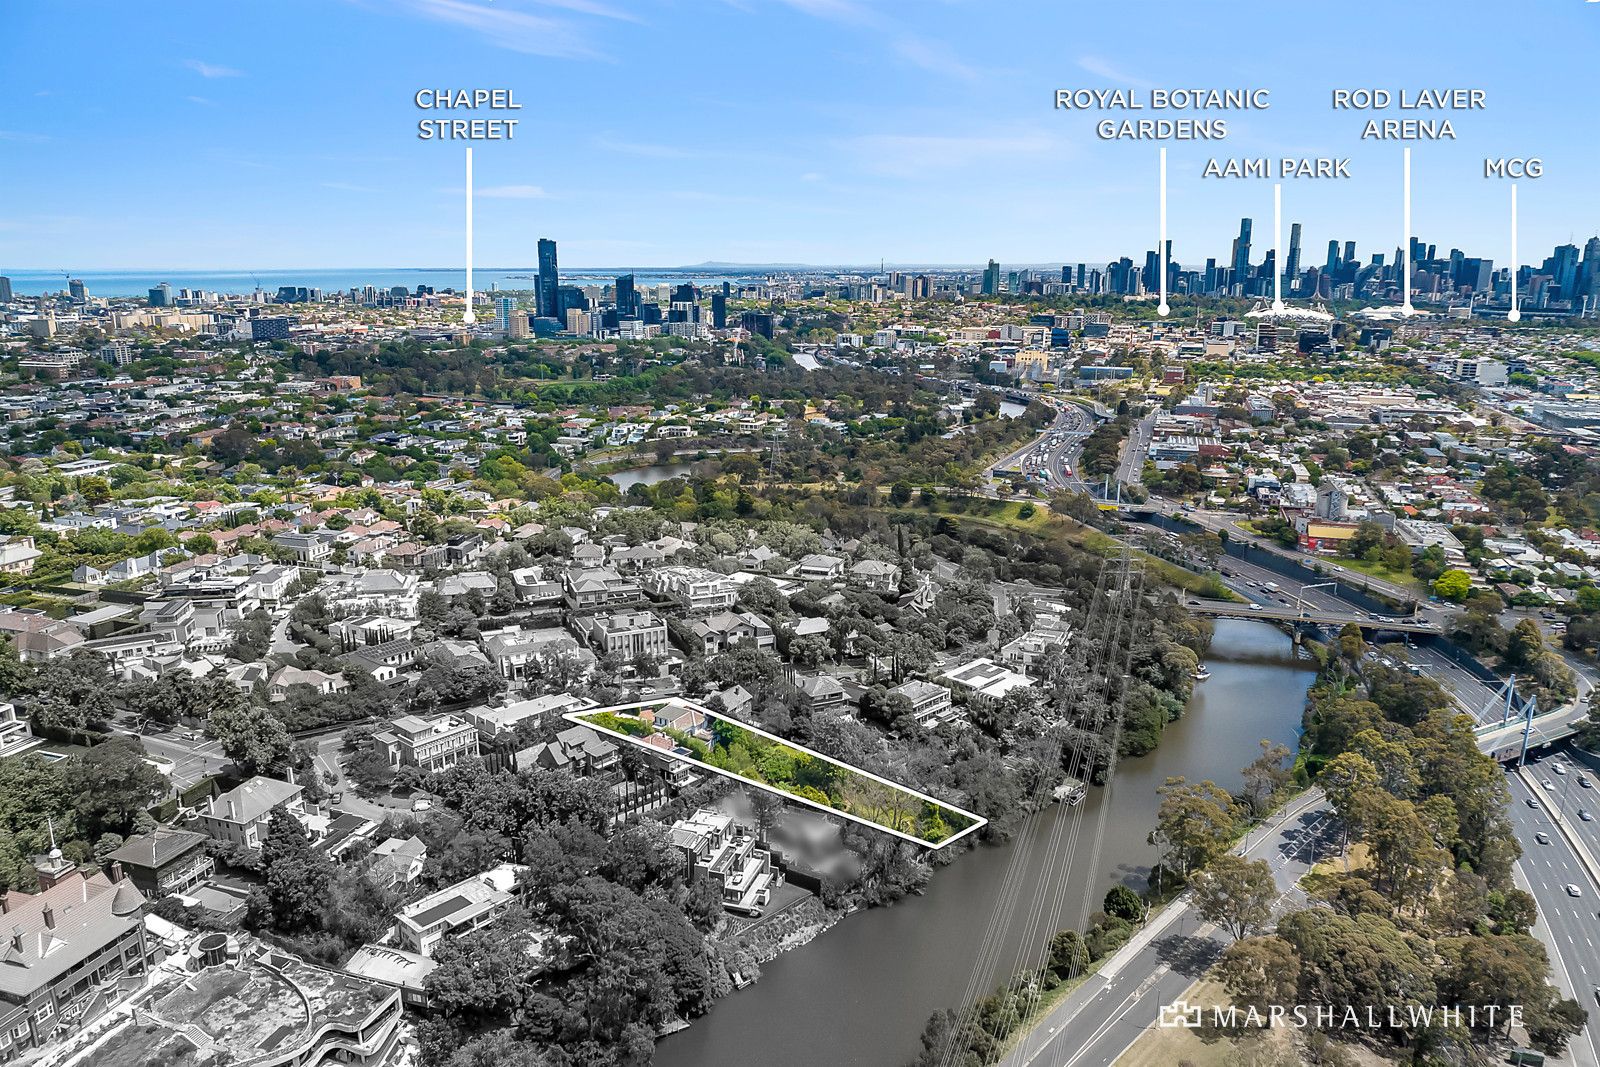 Elite private schools, Heyington station, and Toorak Village Centre are all within walking distance from the property